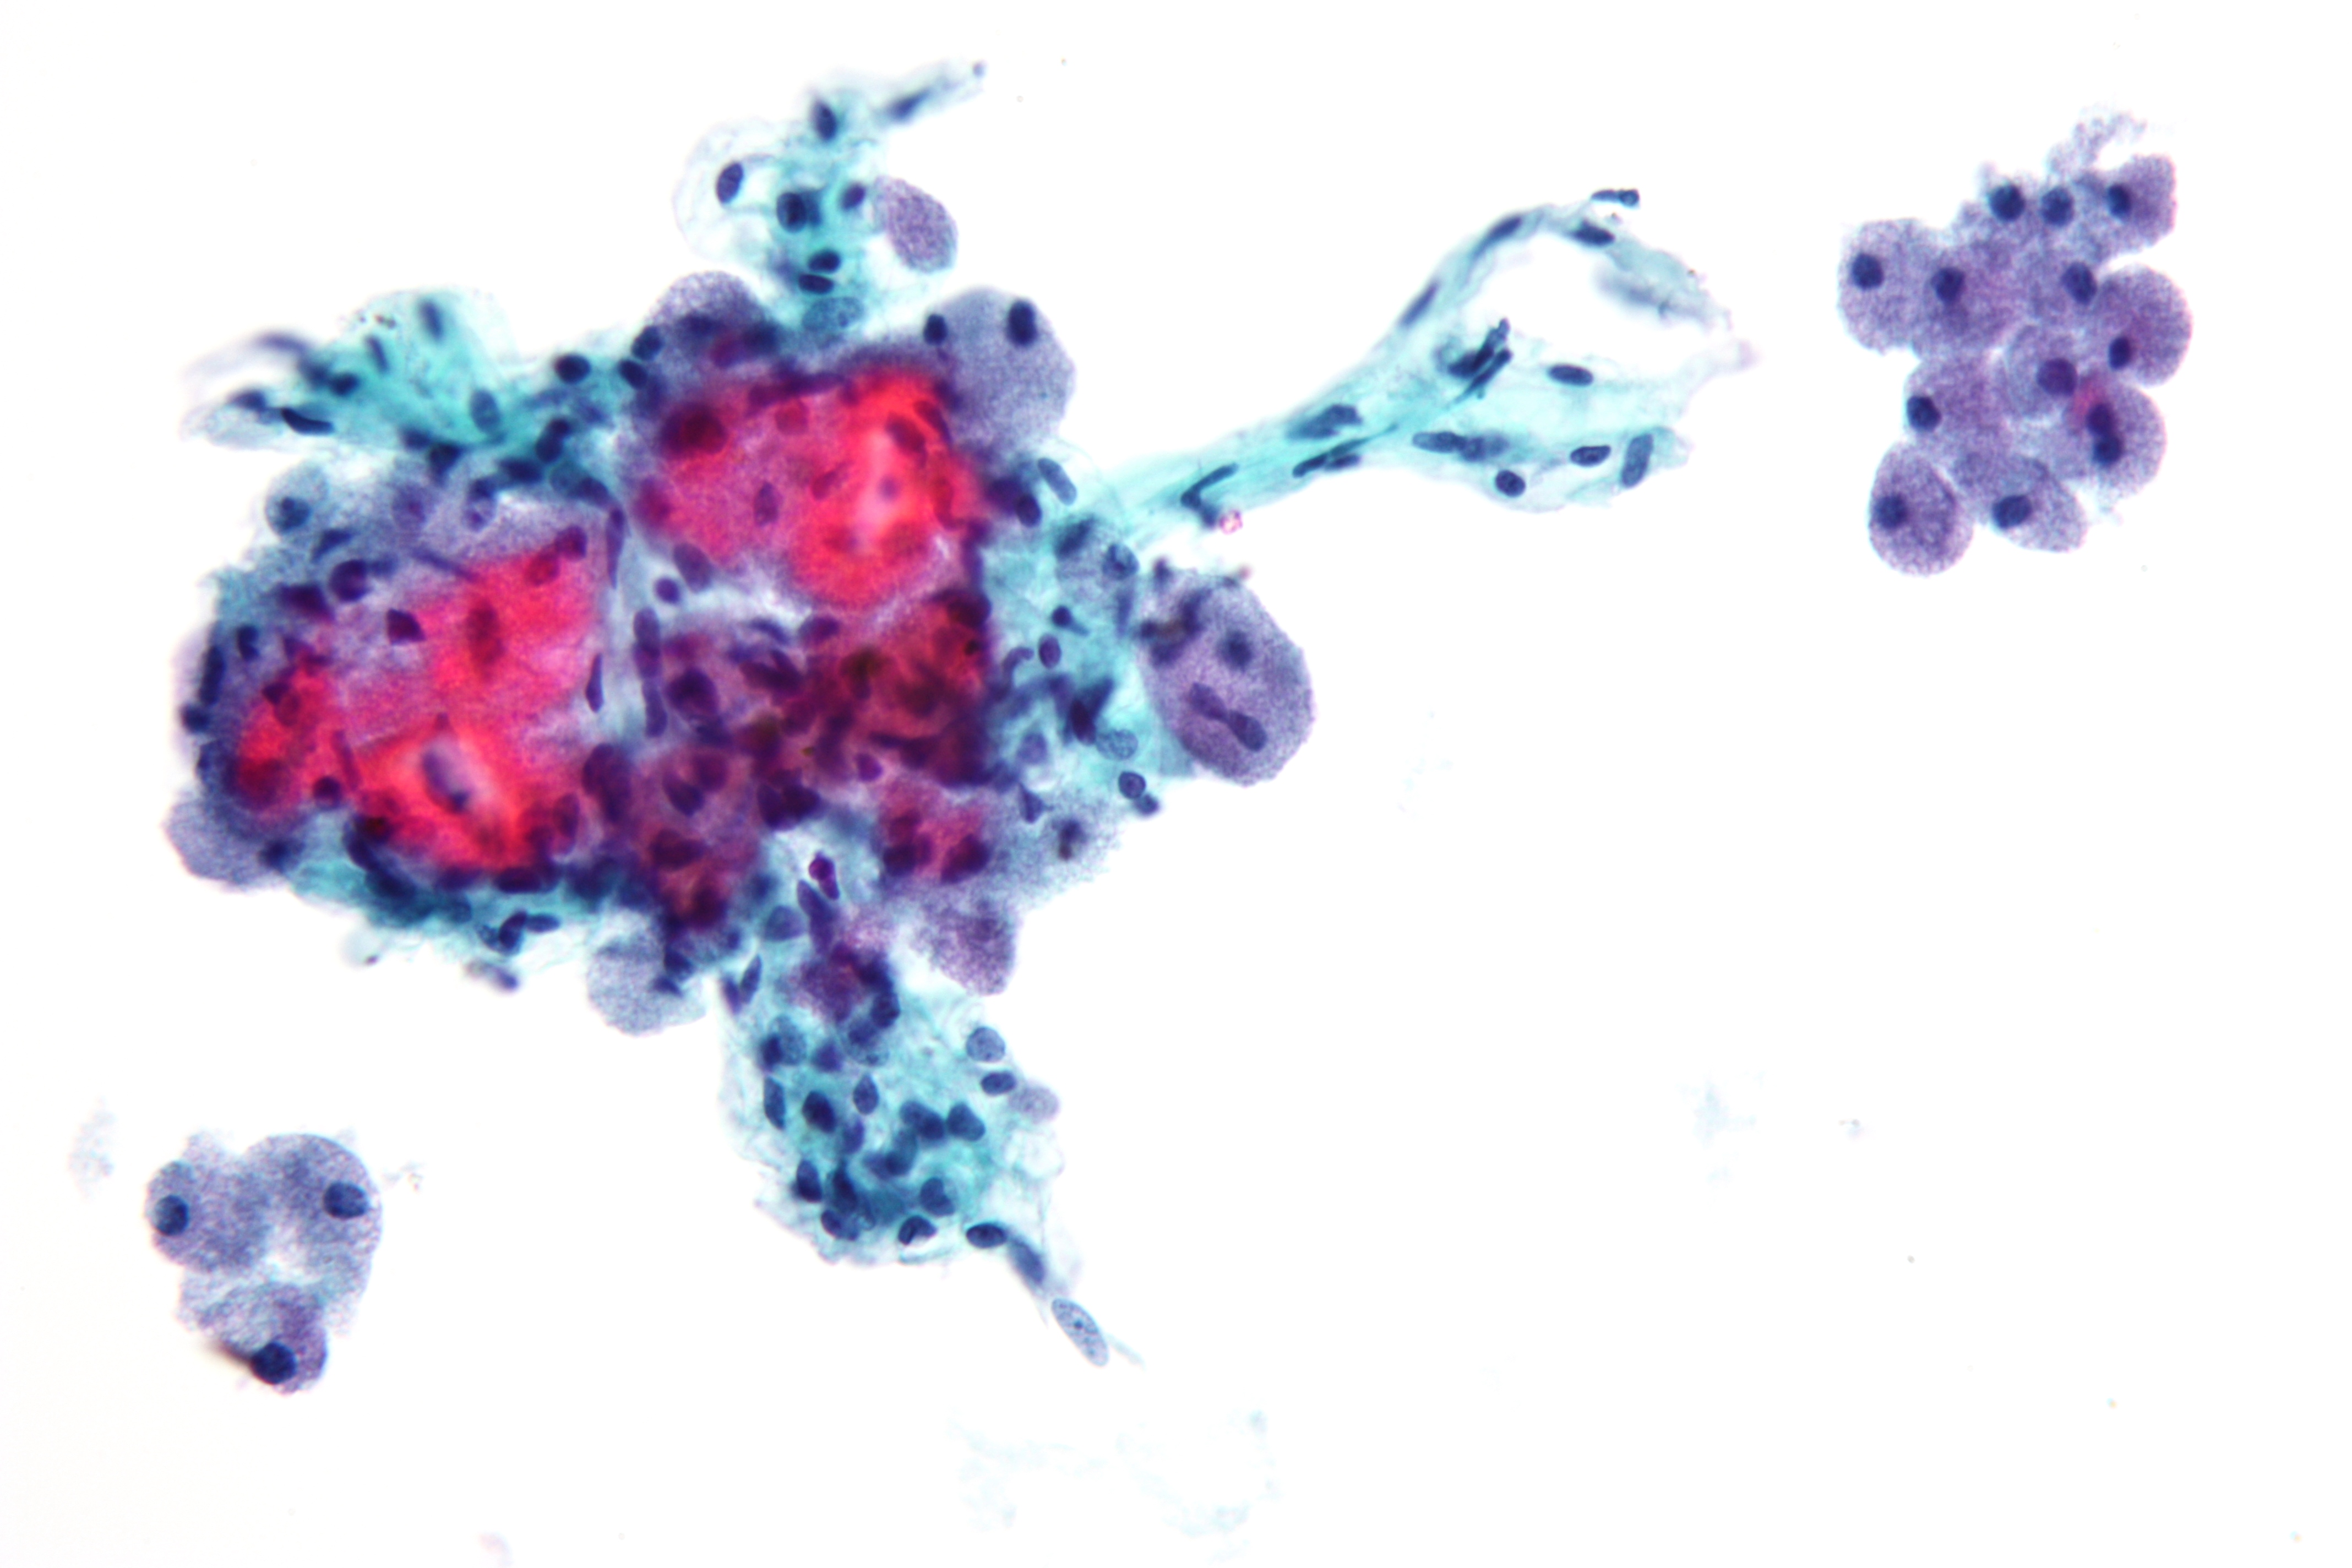 File:Hurthle cell neoplasm.jpg